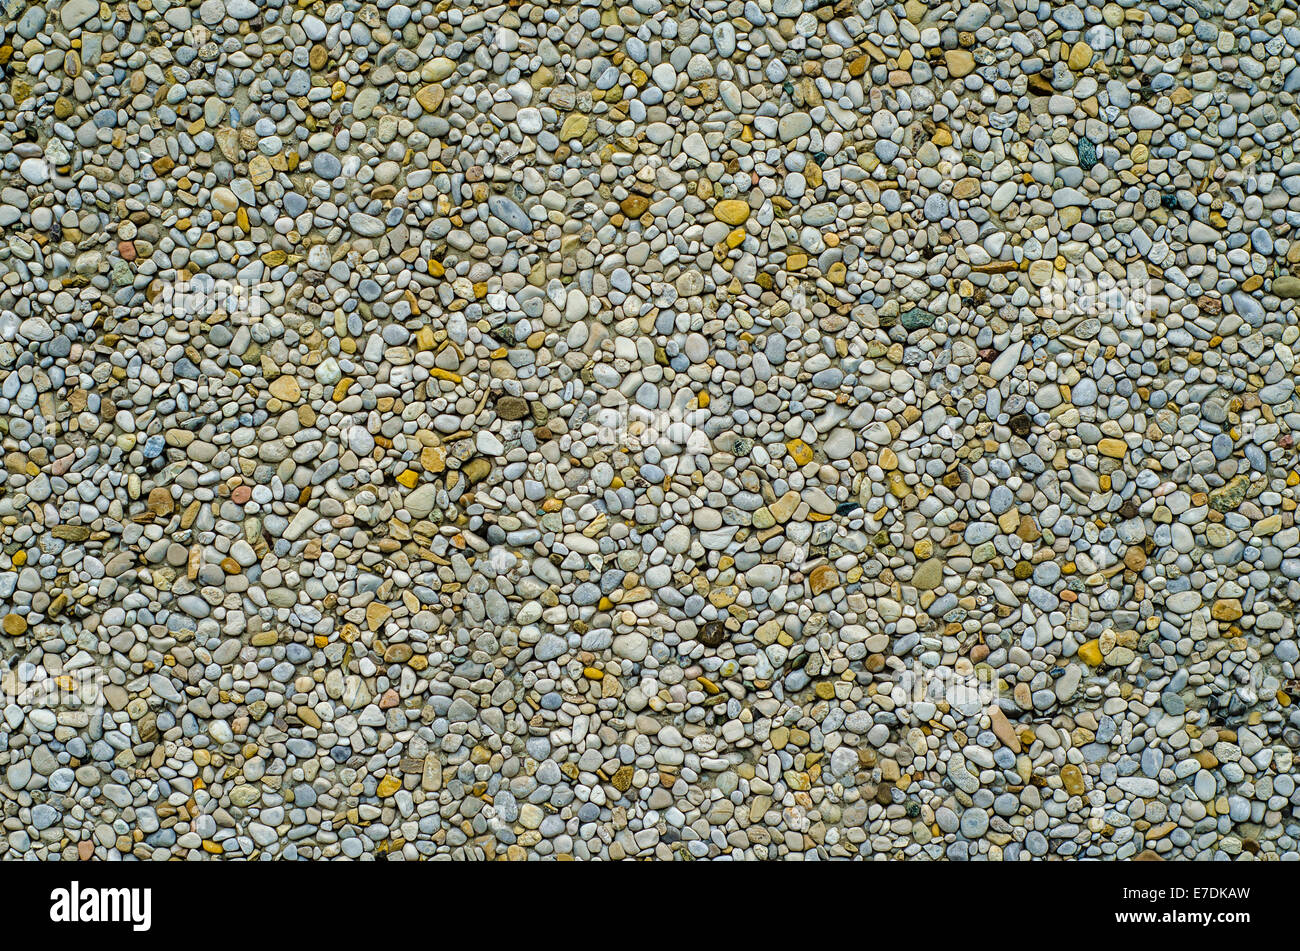 Background Of Pebble Dash Wall Stock Photo